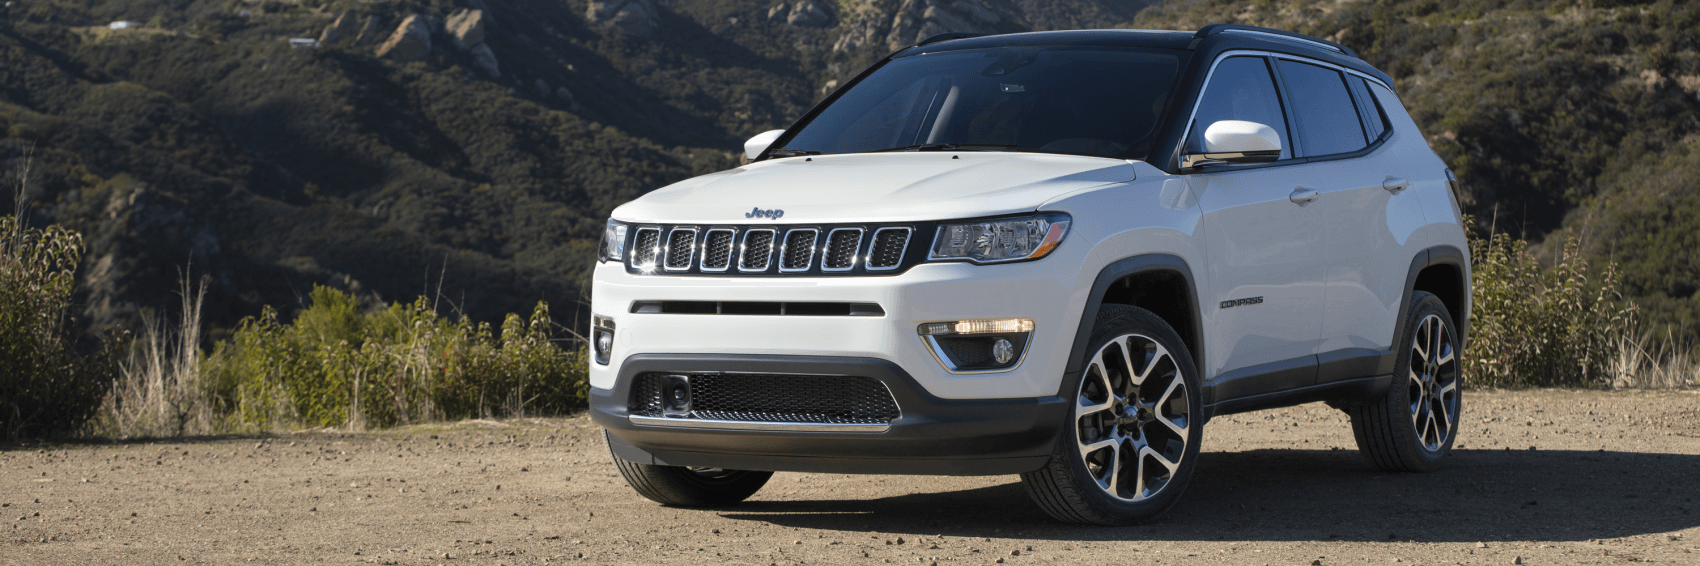 Jeep Compass for Sale near Me